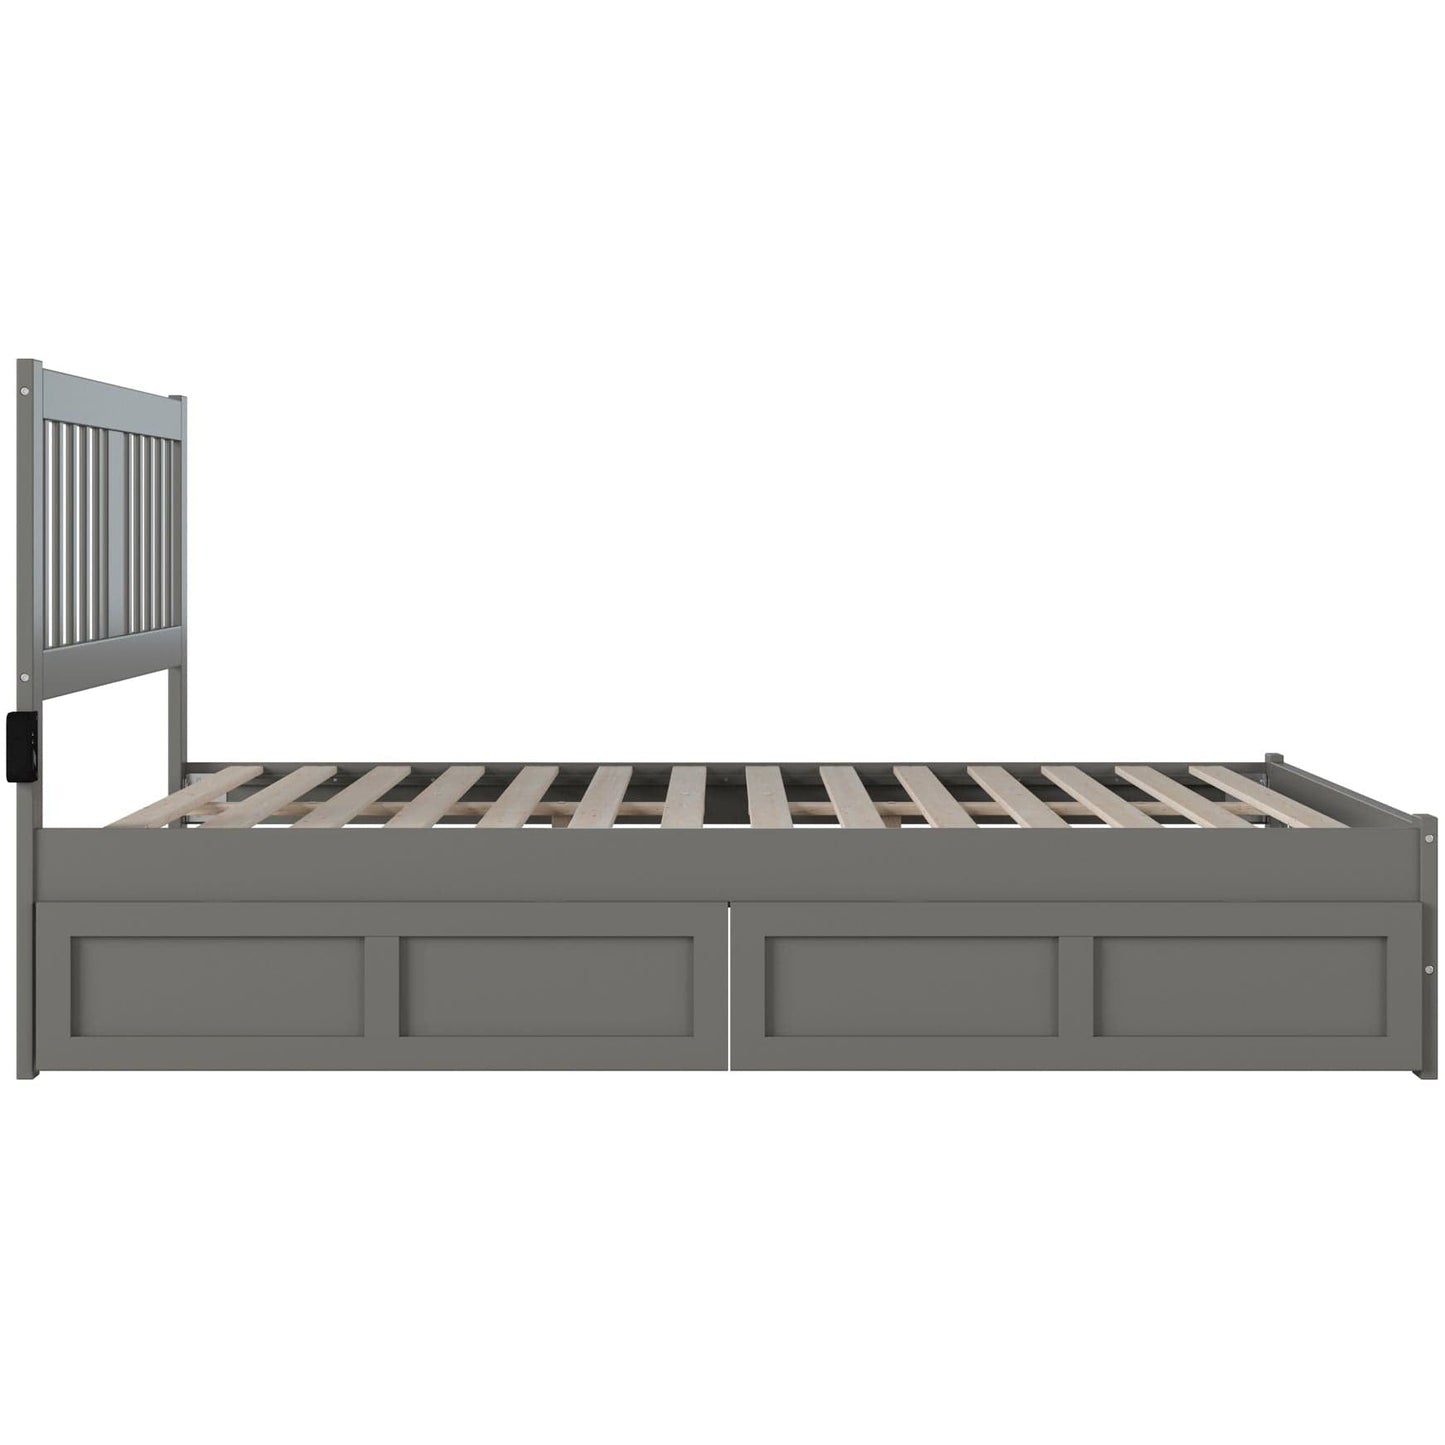 AFI Furnishings Tahoe Queen Bed with Footboard and 2 Drawers in Grey AG8963449